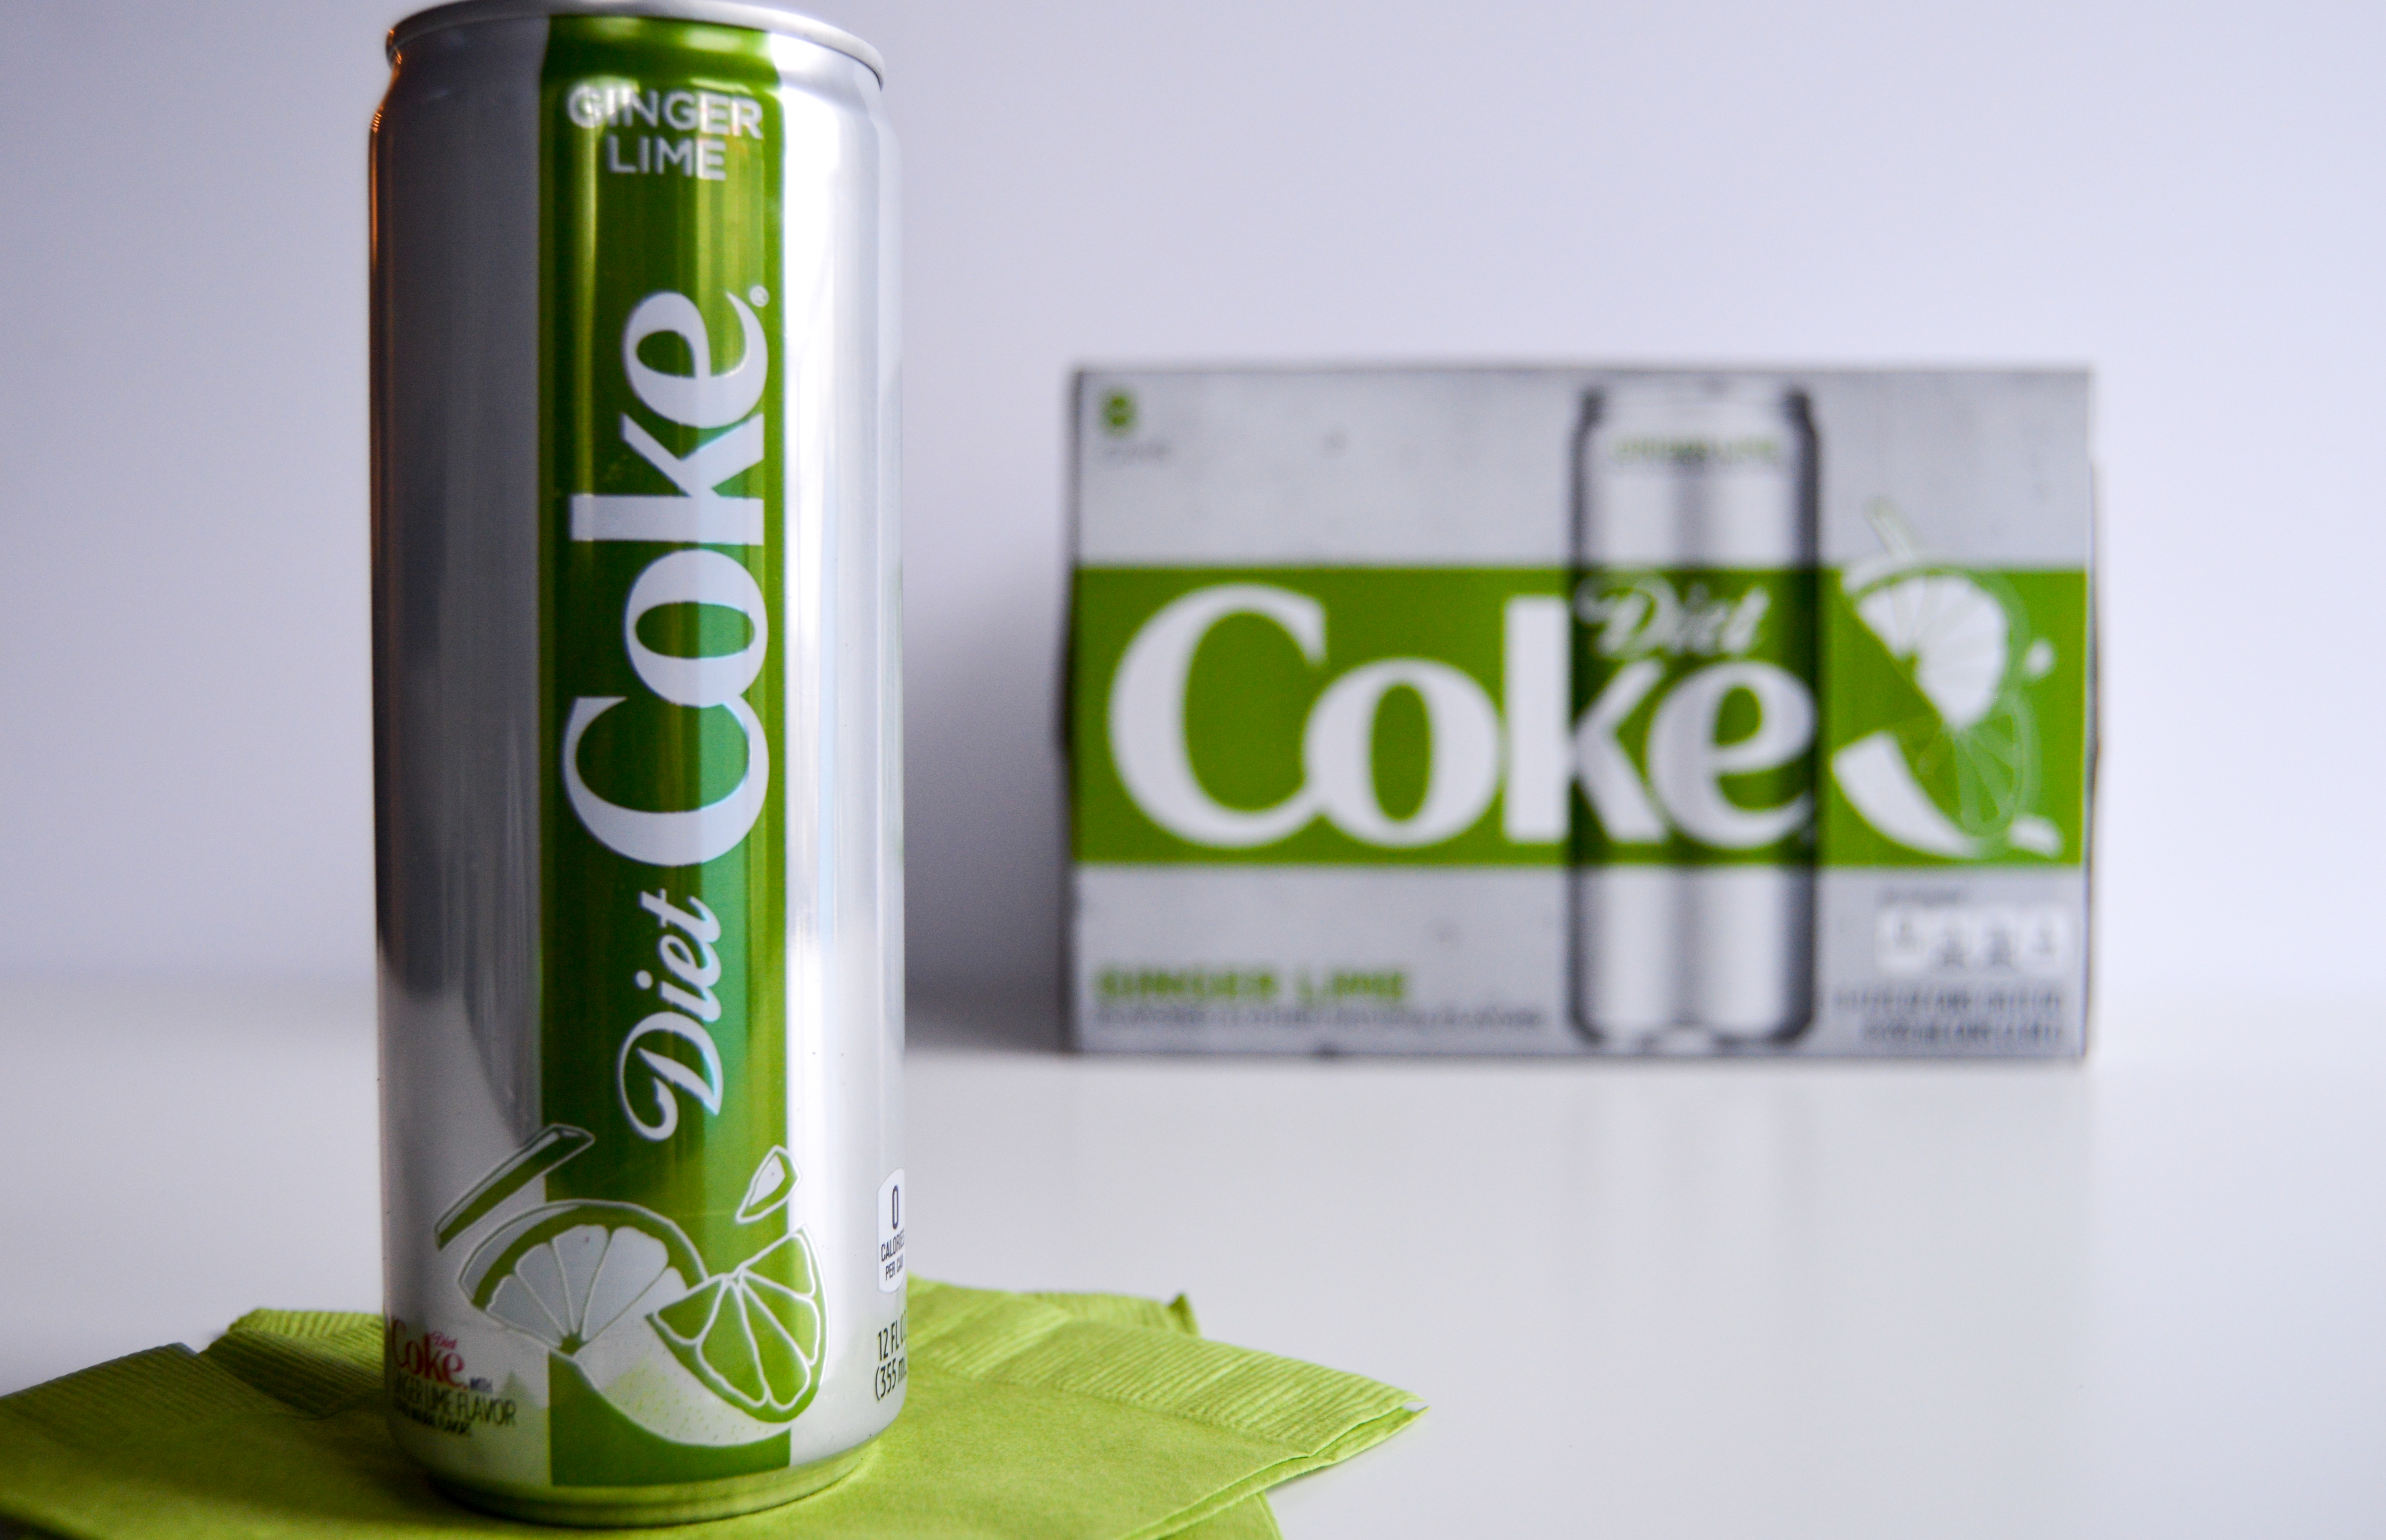 Diet Coke Ginger Lime new fun flavor in a new sleek can